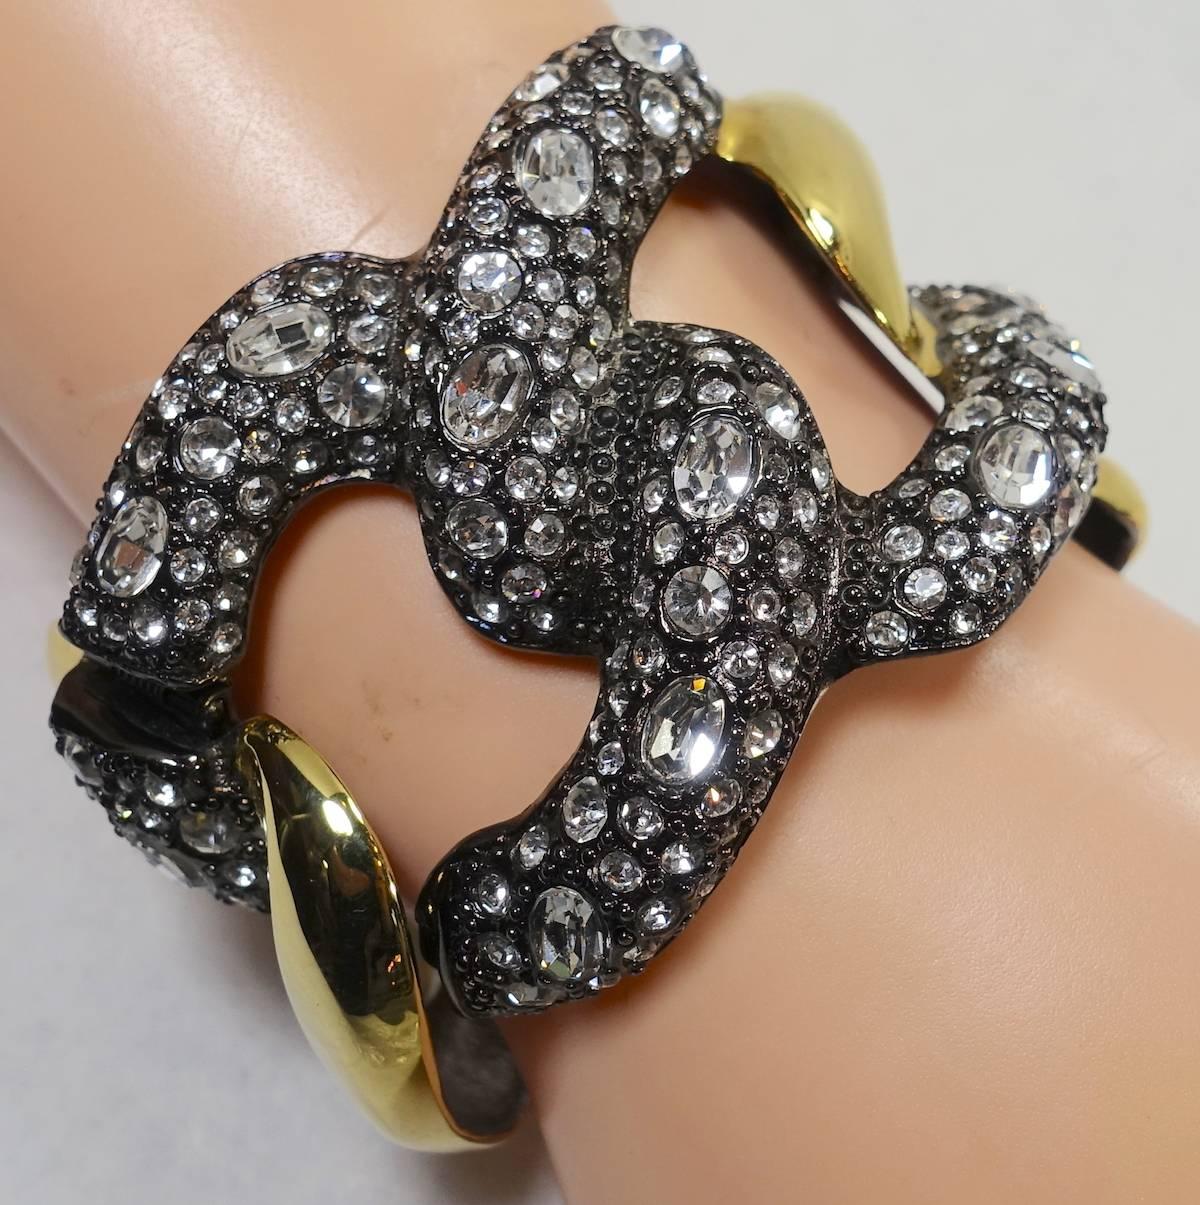 This is a wonderful cuff from Kenneth Jay Lane.  The front has parve rhinestones interlocking in the front while combining a gold tone look on the sides in a Japanned setting.   It measures 2” high at its highest point and is 6-1/2” wide with a side